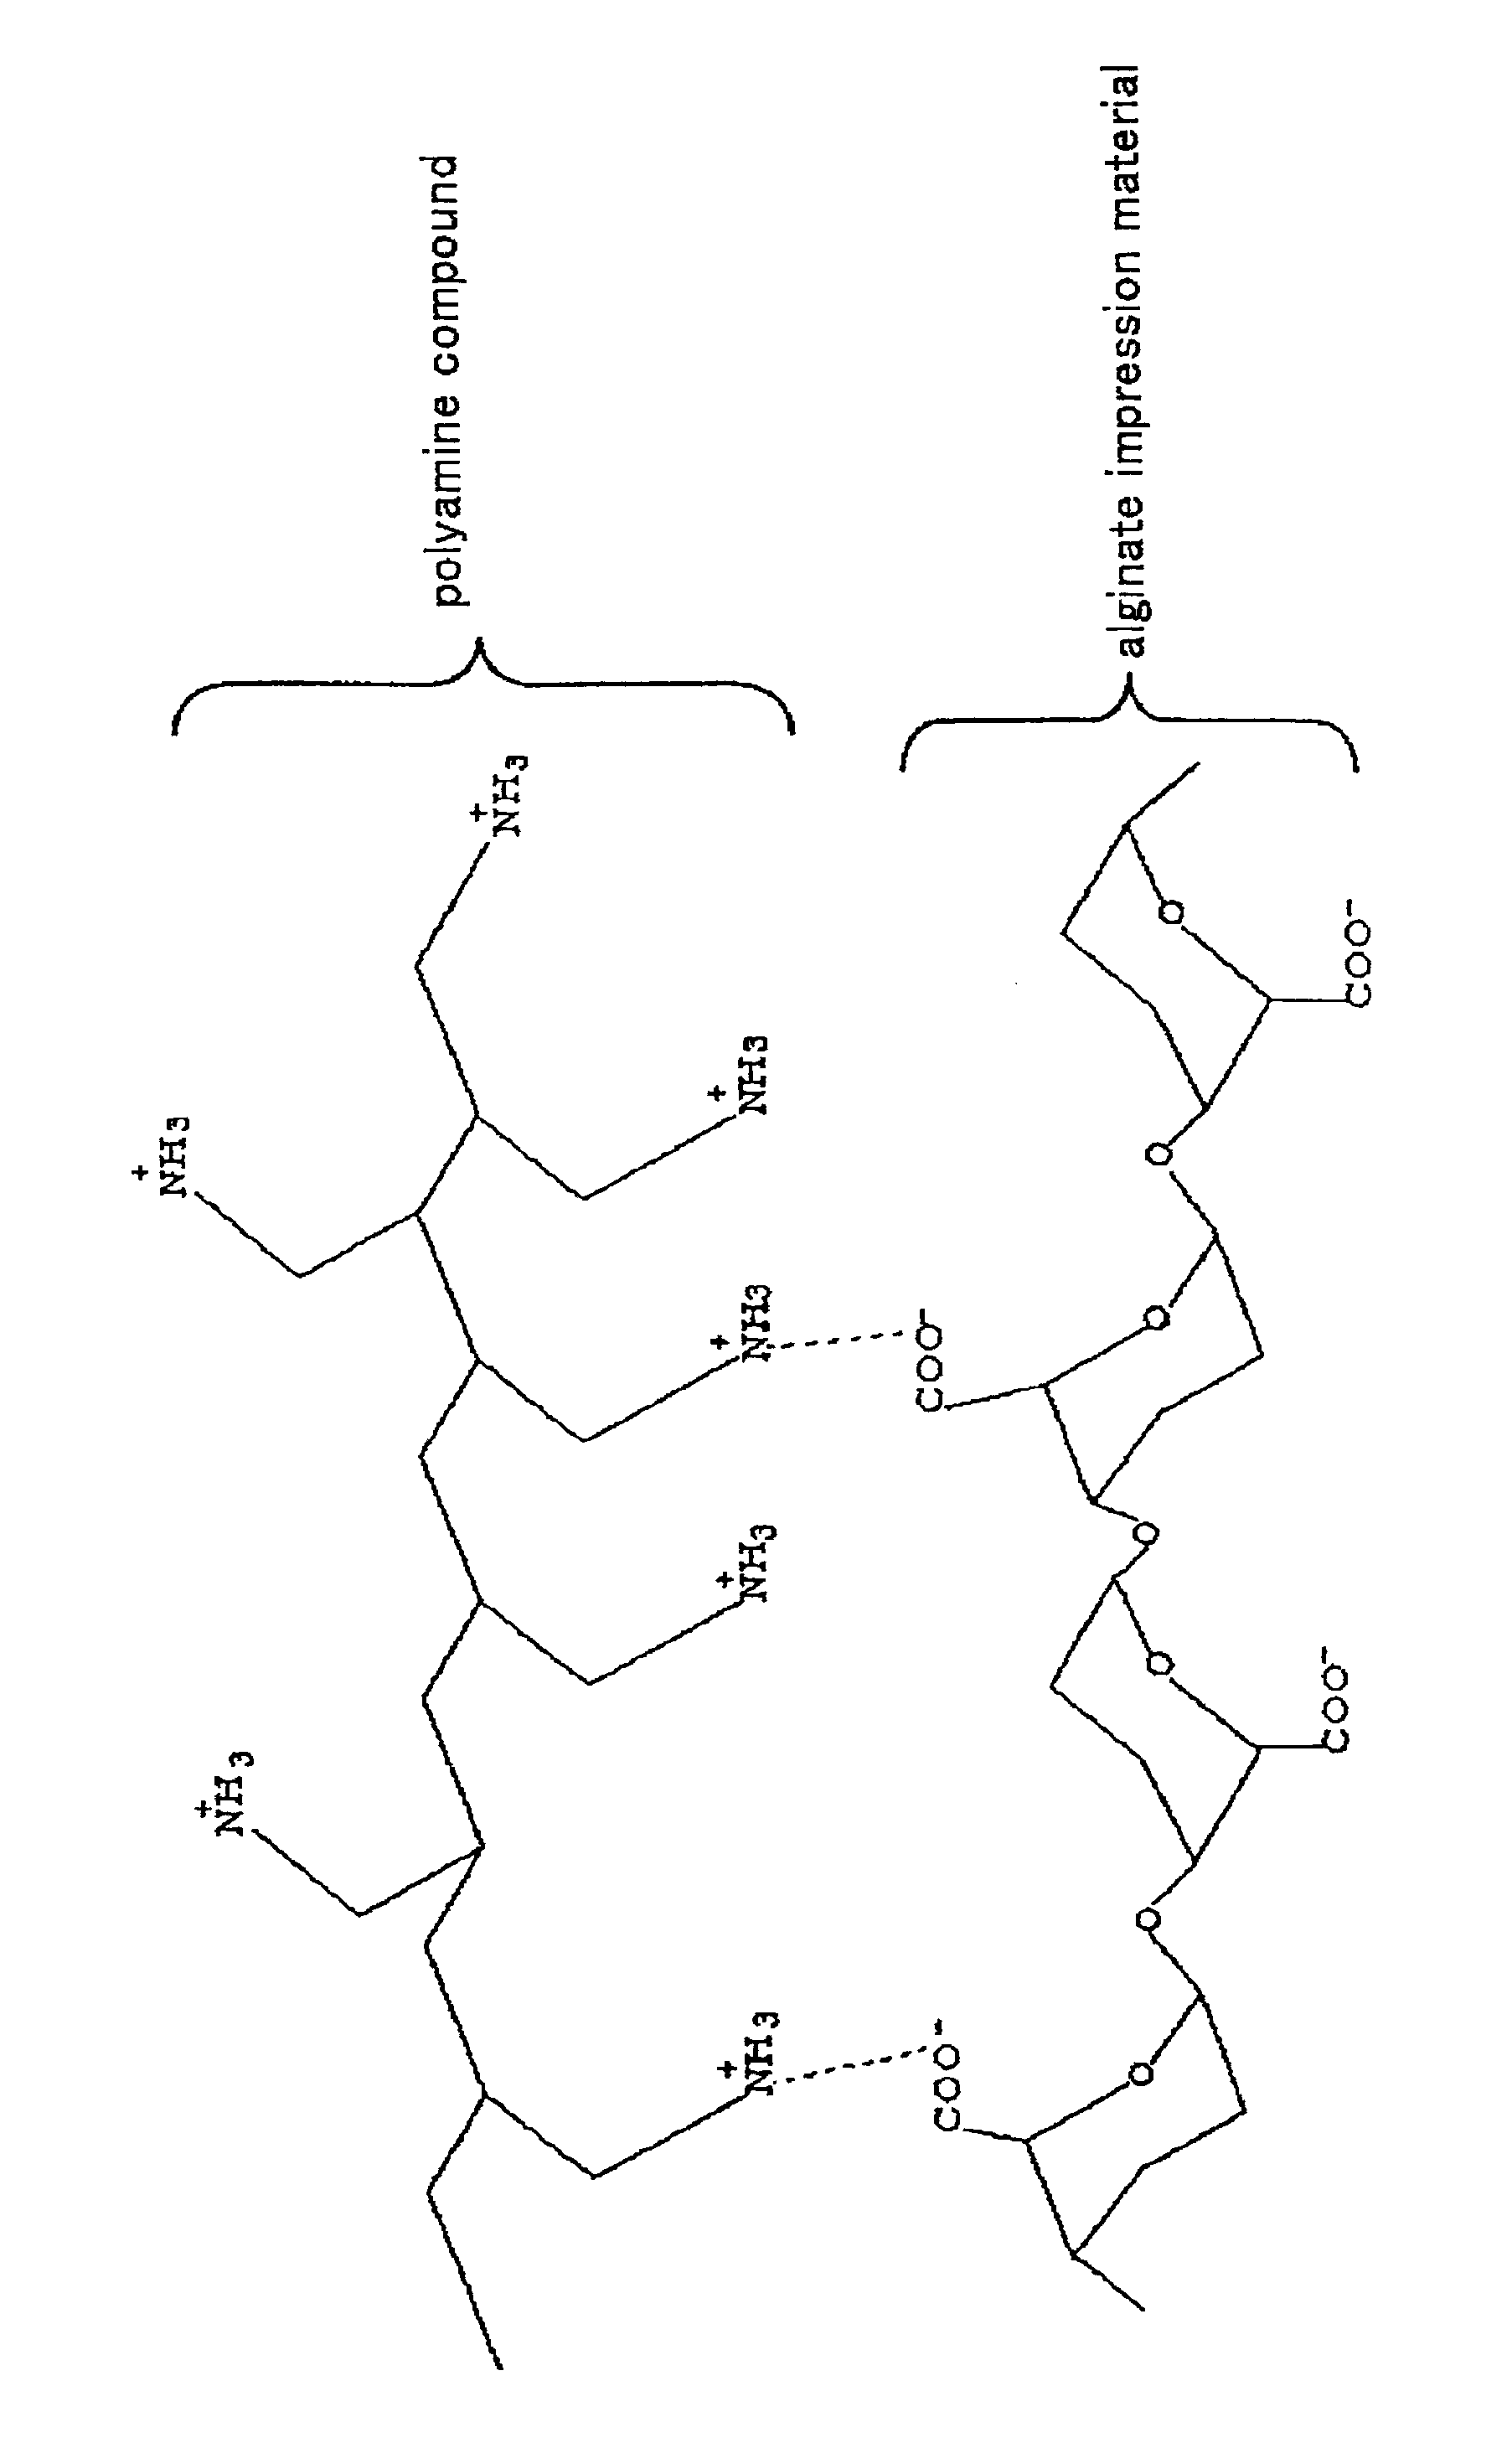 Adhesive agent for adhesion between alginate impression material and impression tray for dental applications, and kit comprising the adhesive agent